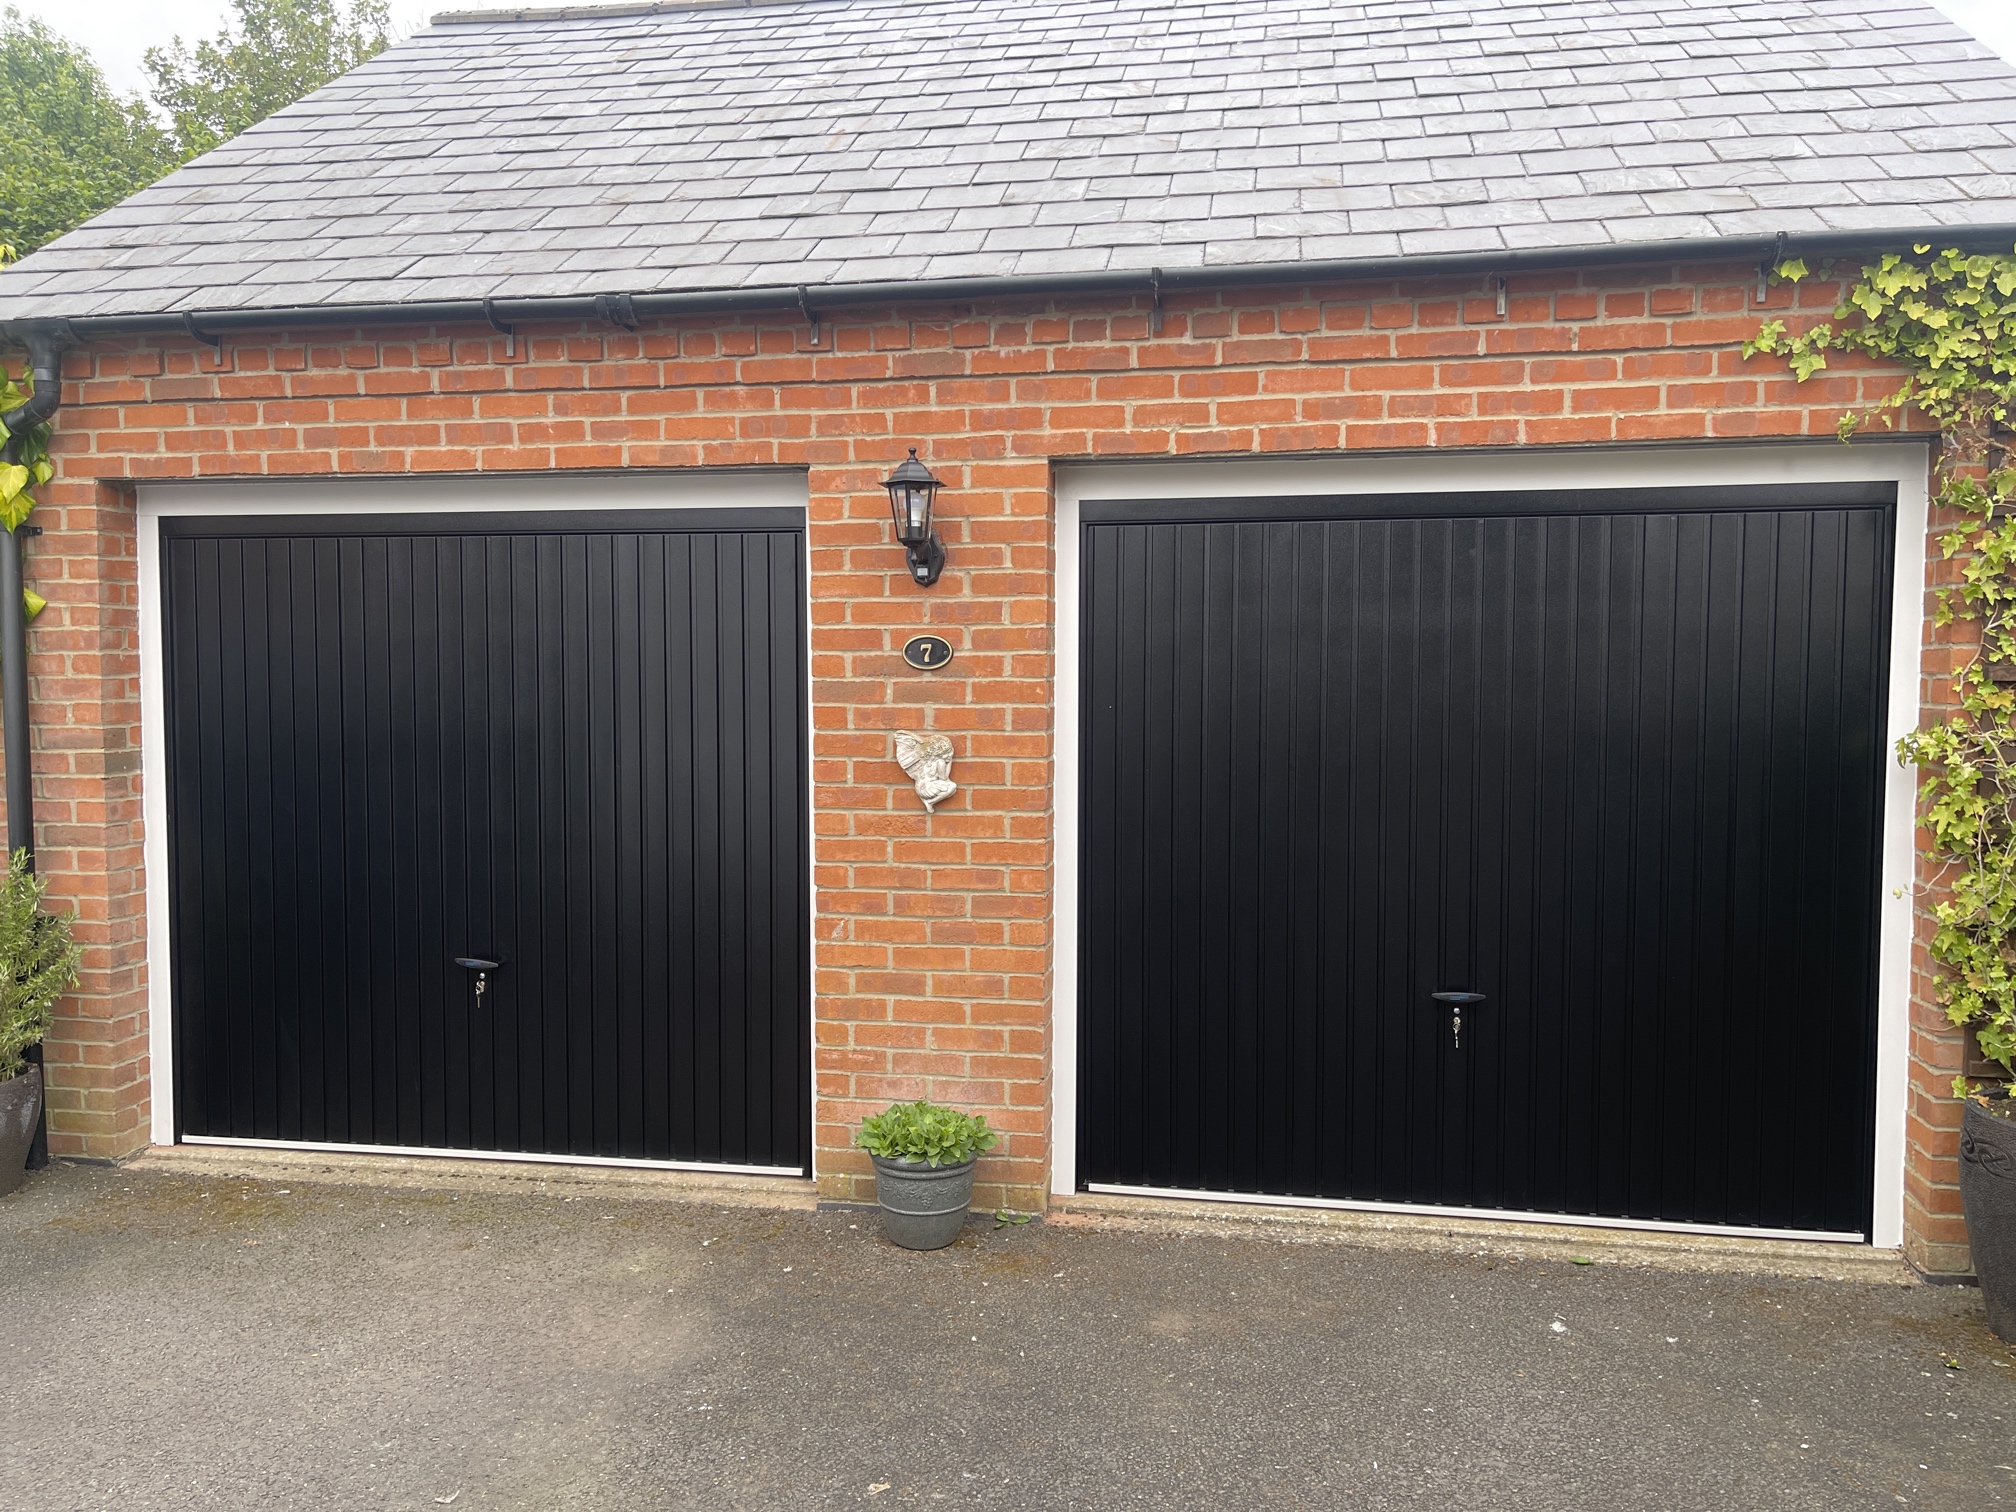 2 garage doors in black and side by side